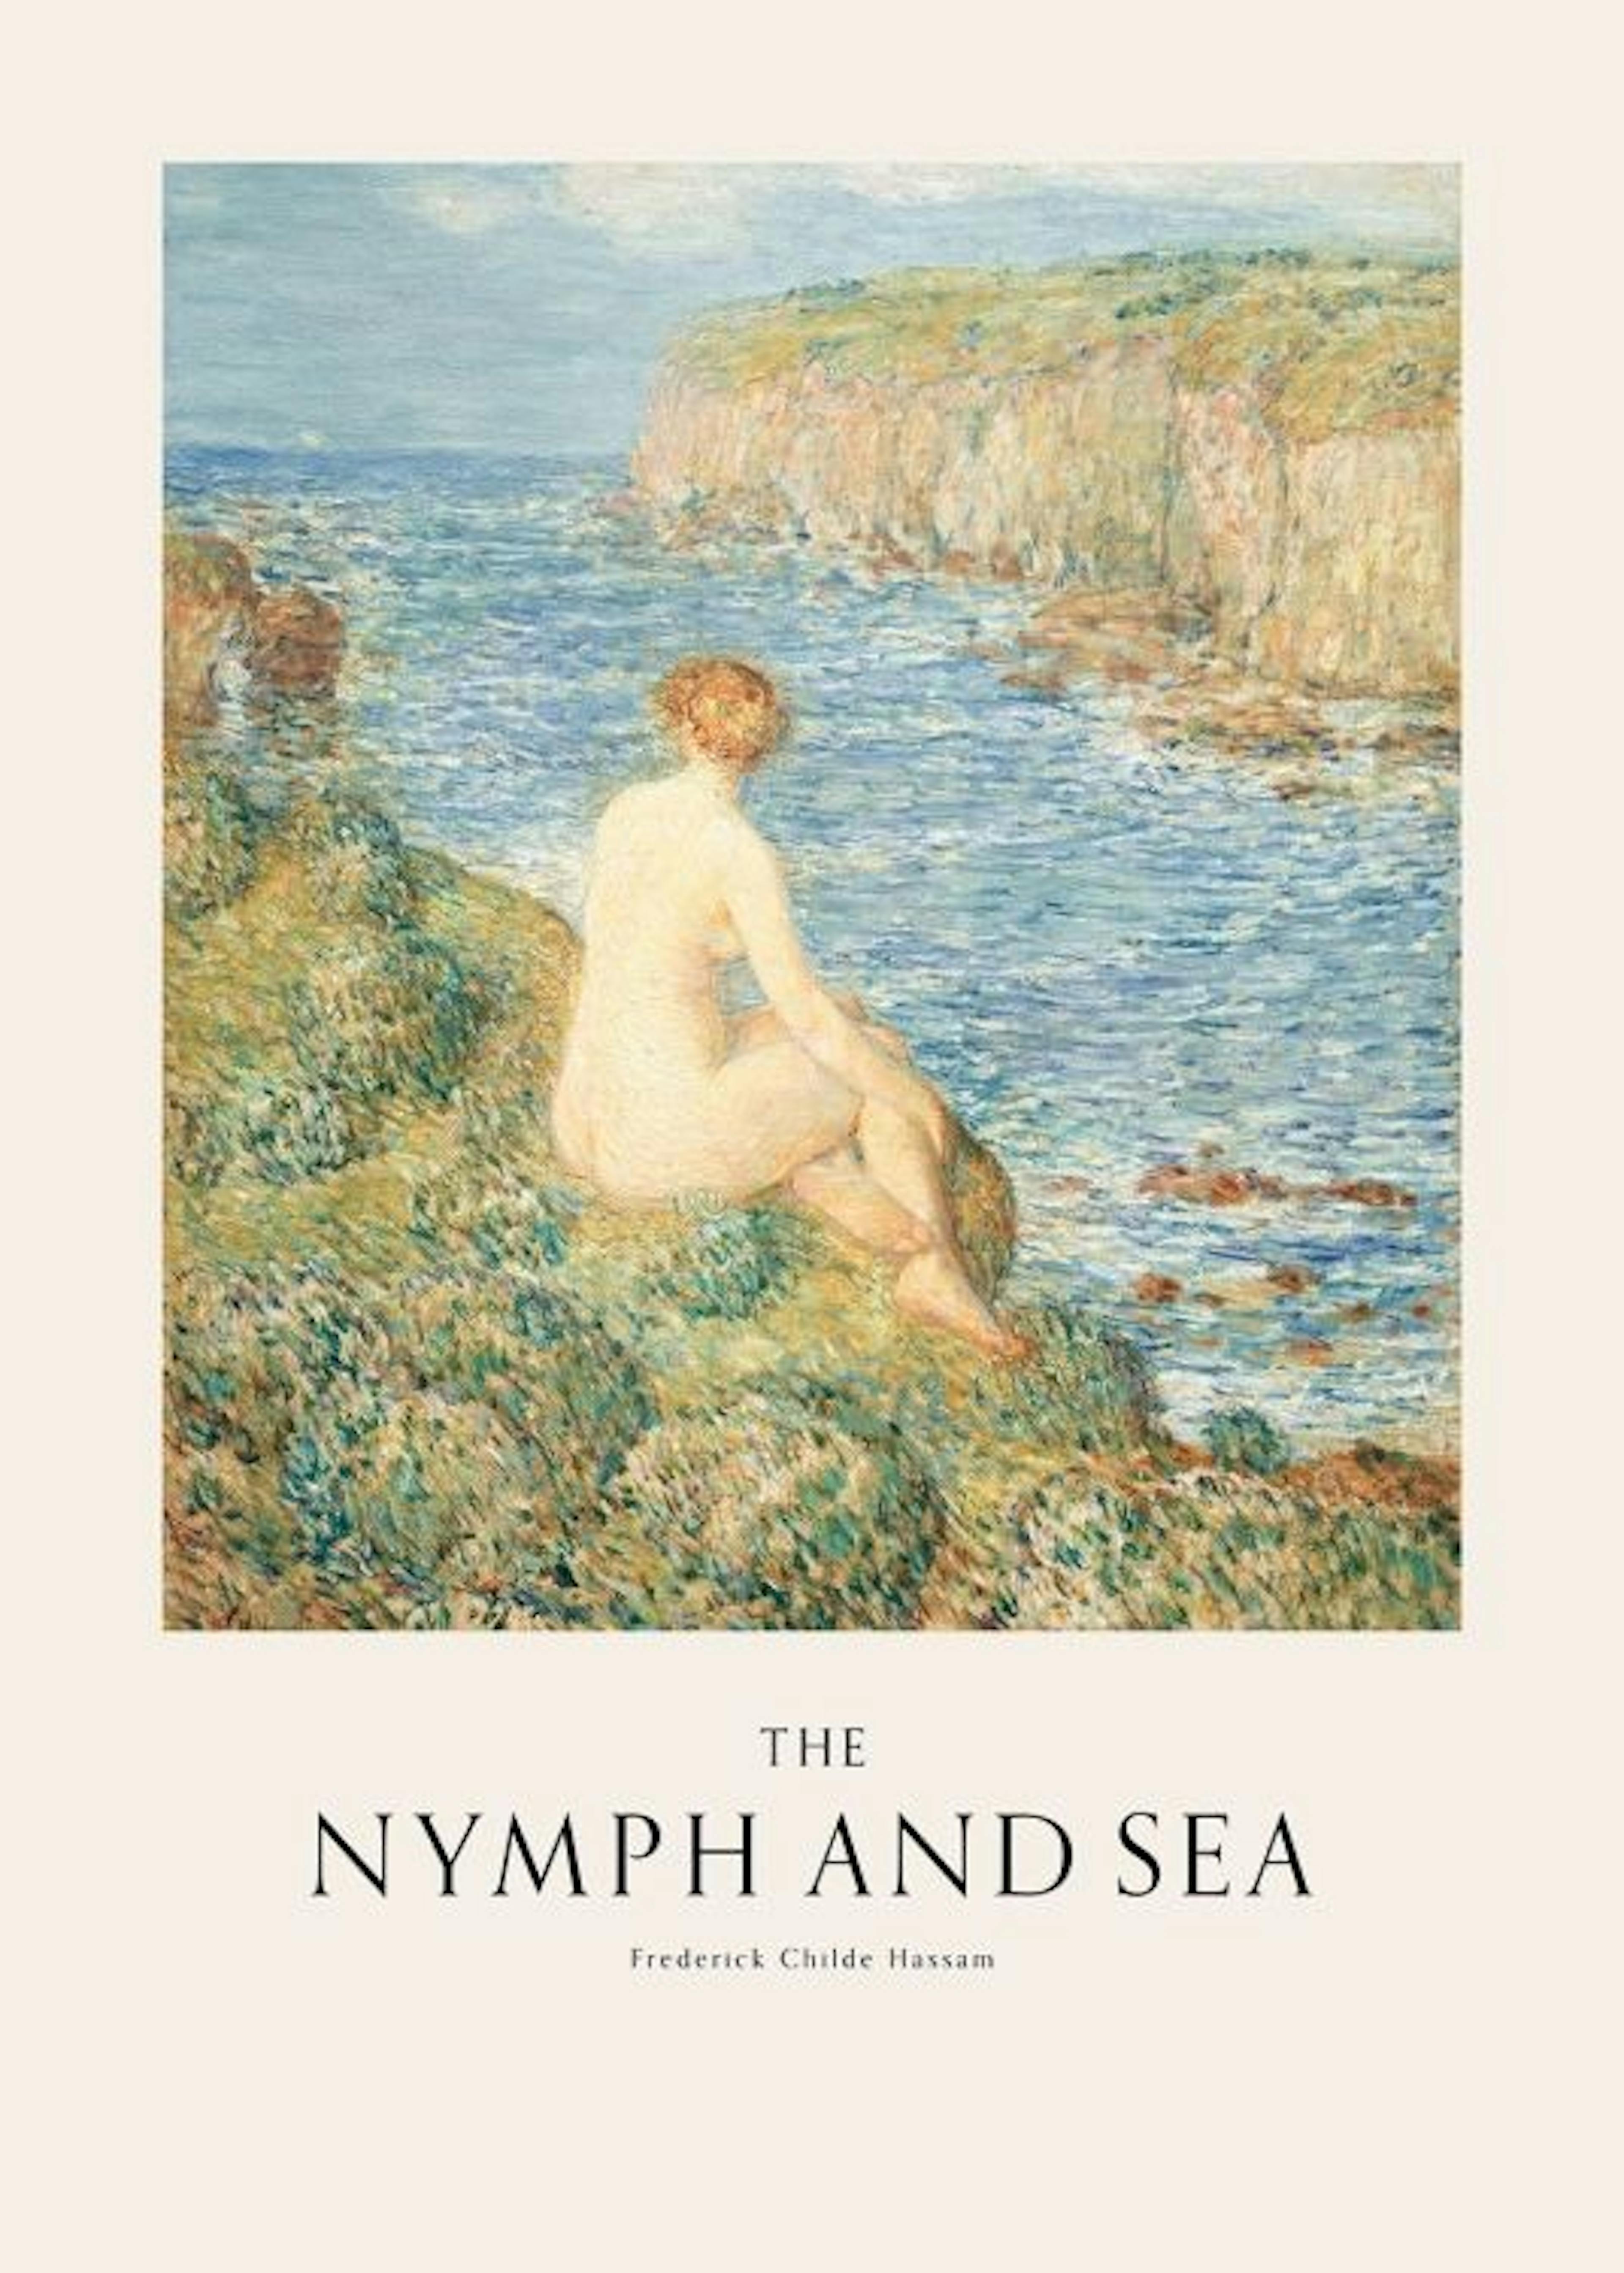 Frederick Childe Hassam - The Nymph and Sea Poster